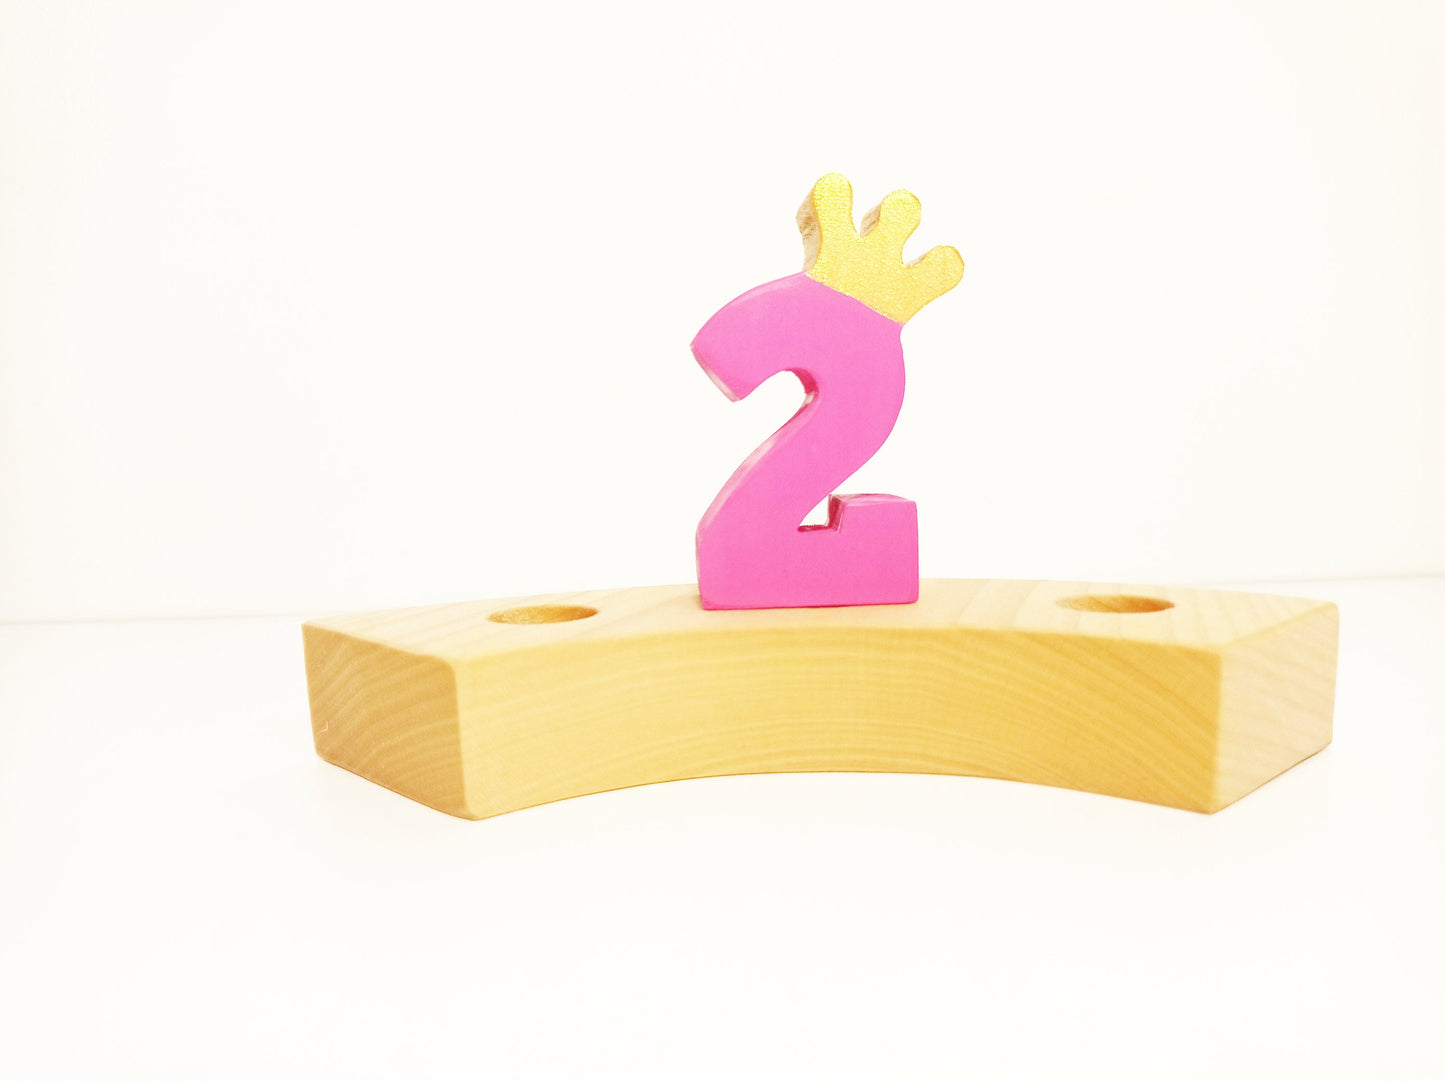 Number 2 birthday ring ornament, waldorf ring ornament, waldorf decoration, birthday ring, birthday decorations, waldorf numbers, jaar ring